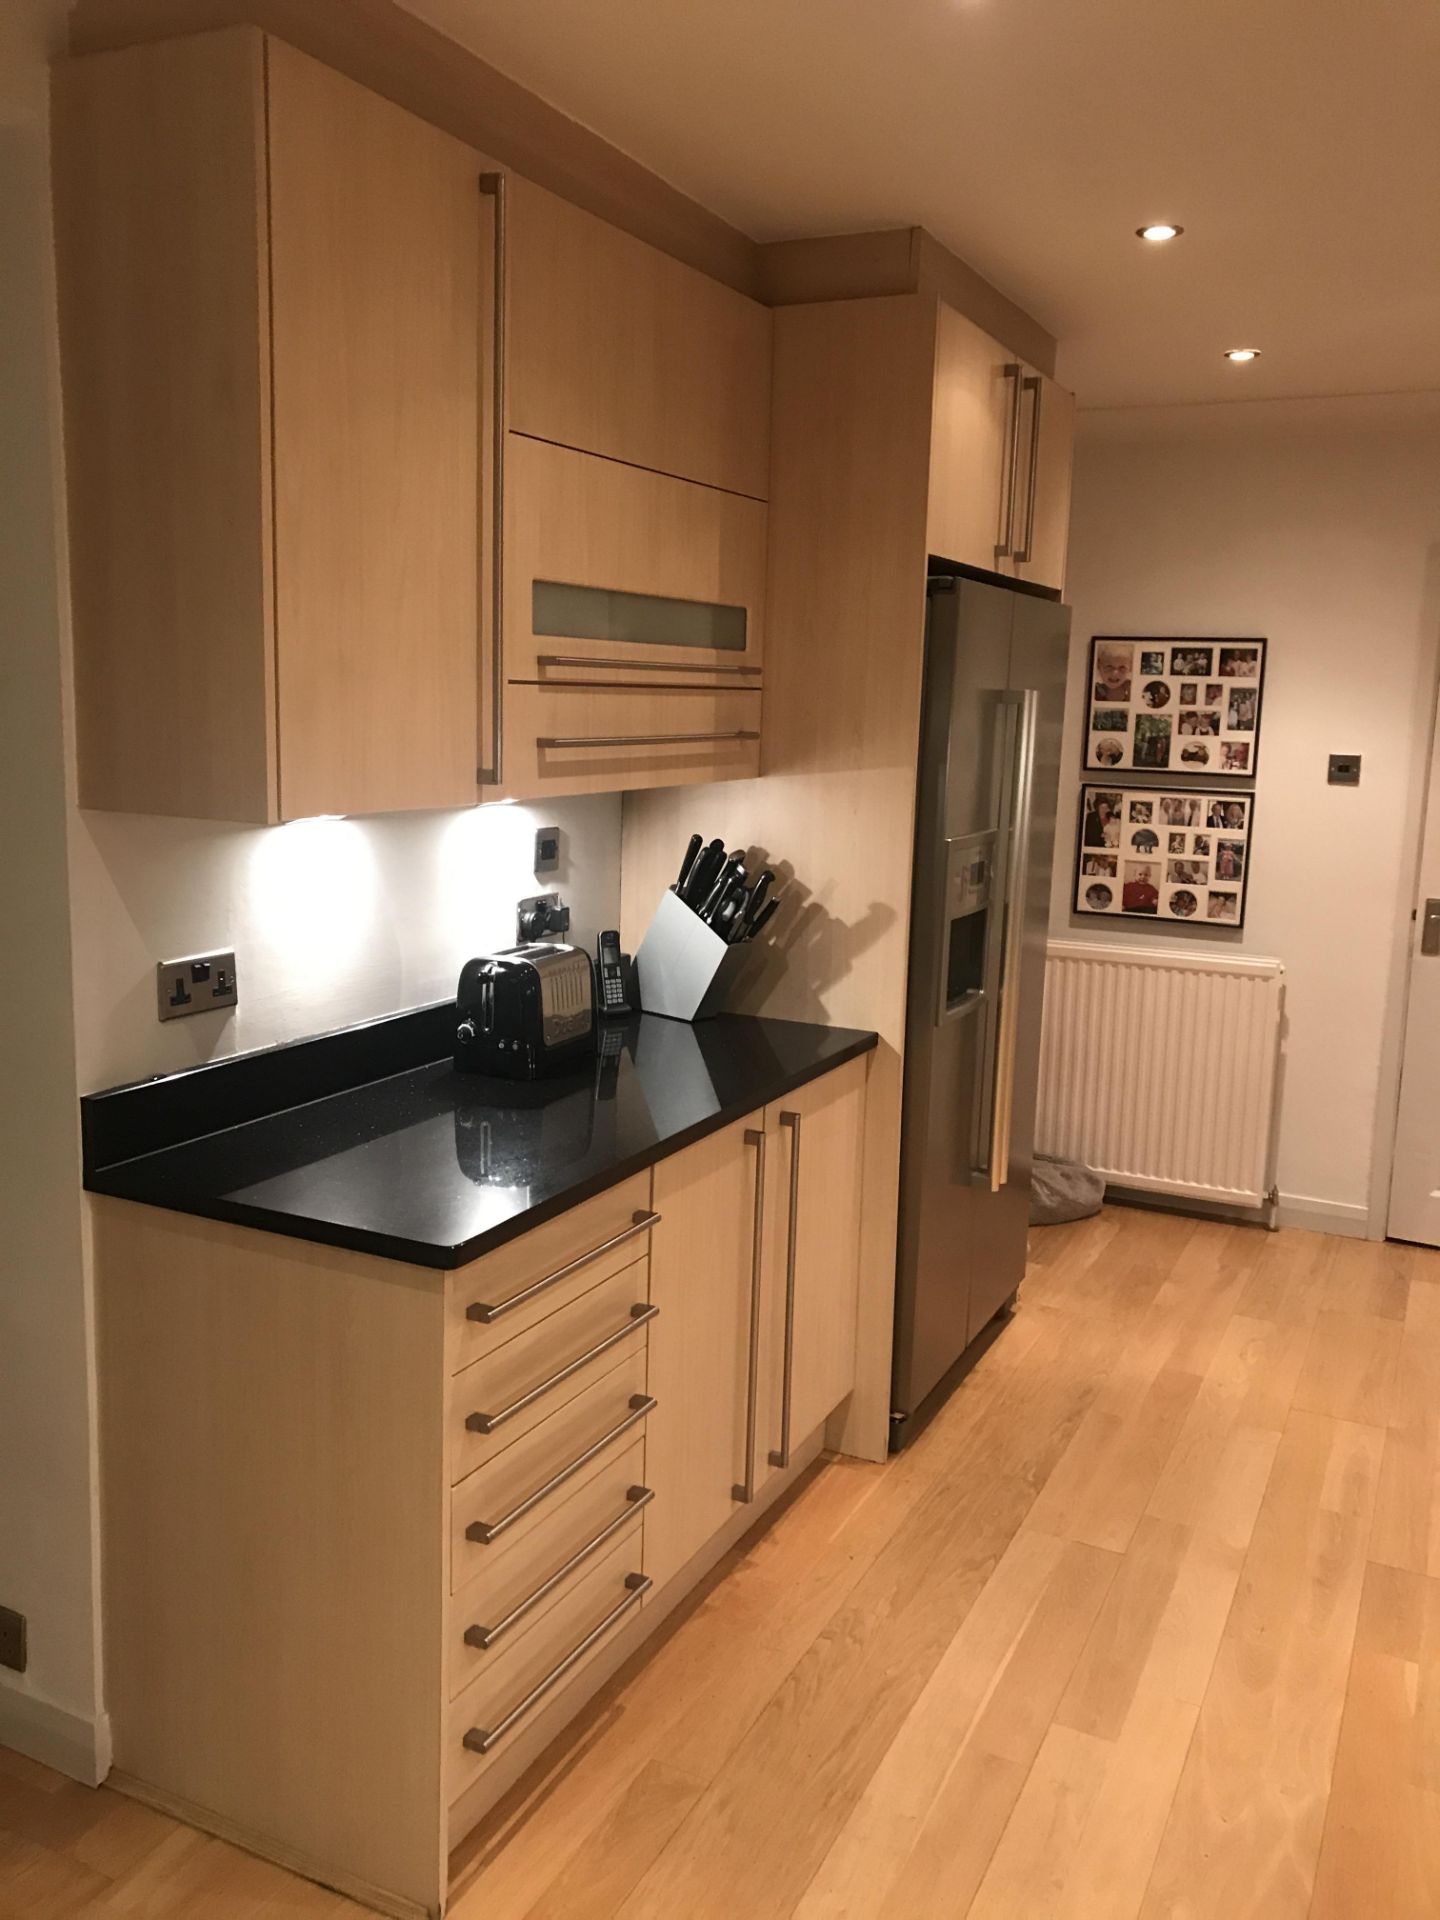 1 x Fitted Kitchen Featuring Birch Soft Close Doors, Black Granite Worktops and Zanussi Appliances - - Image 33 of 51